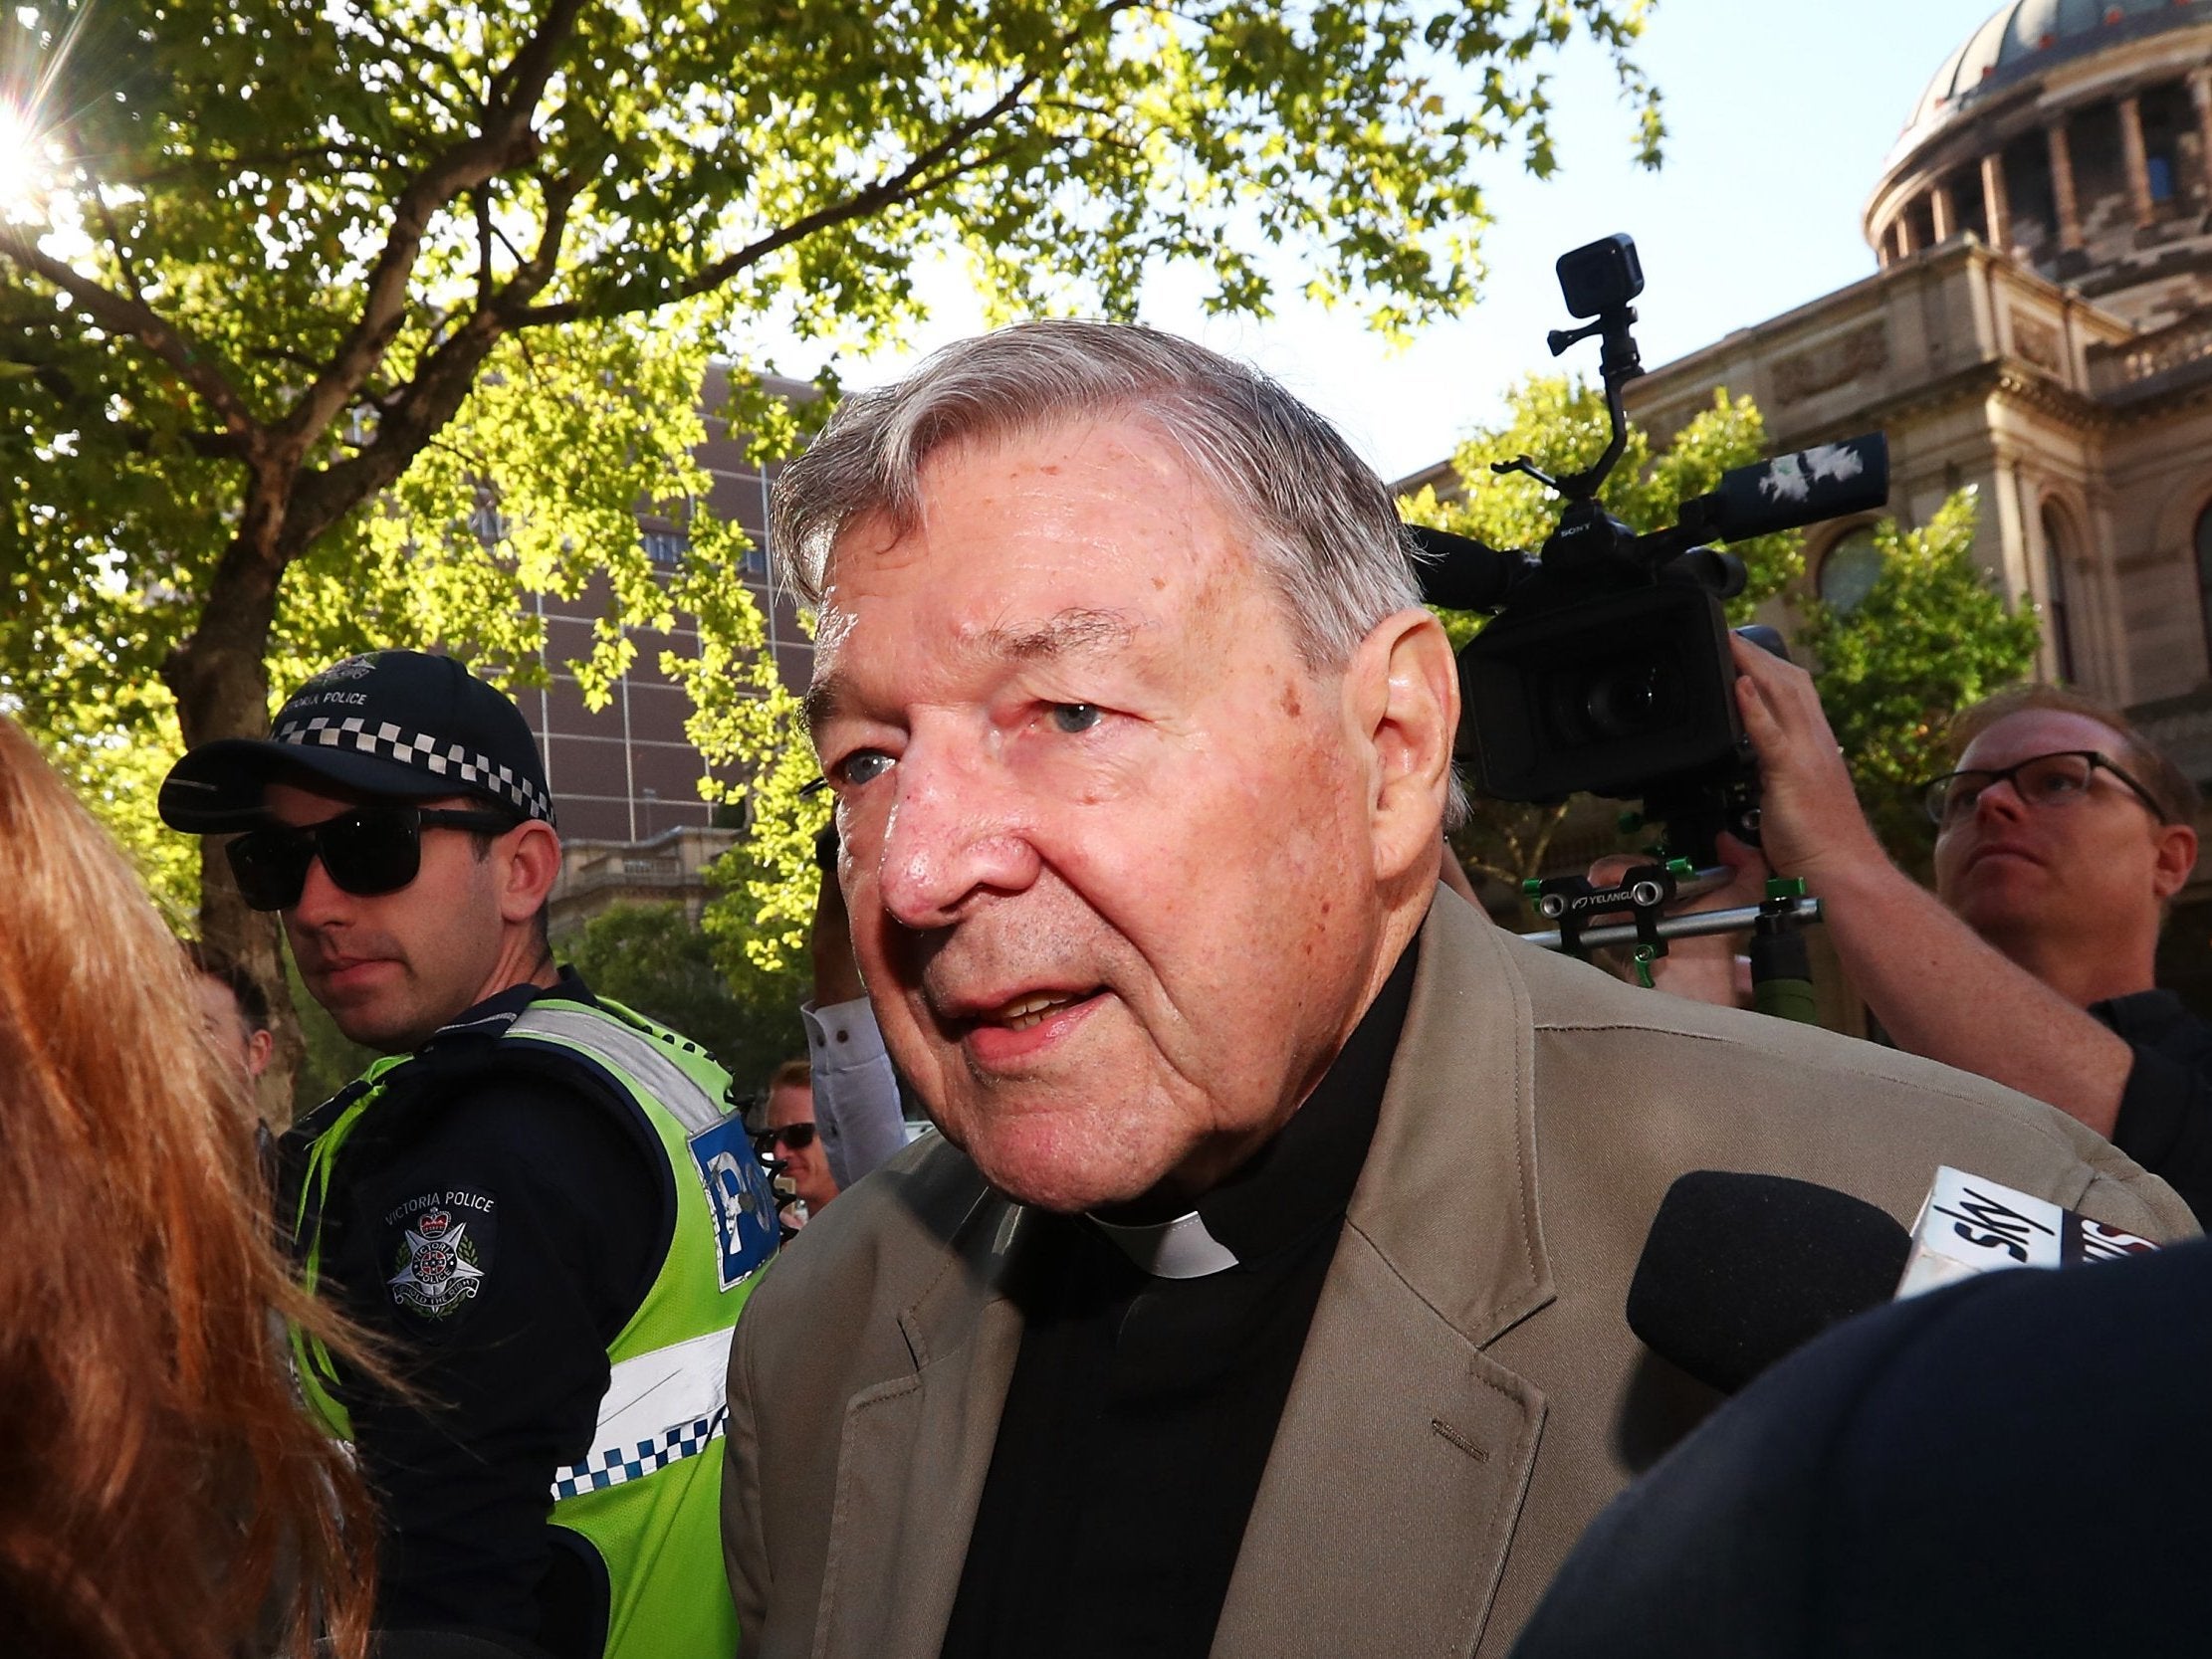 Pell arrives at Melbourne’s county court on Wednesday (Getty)